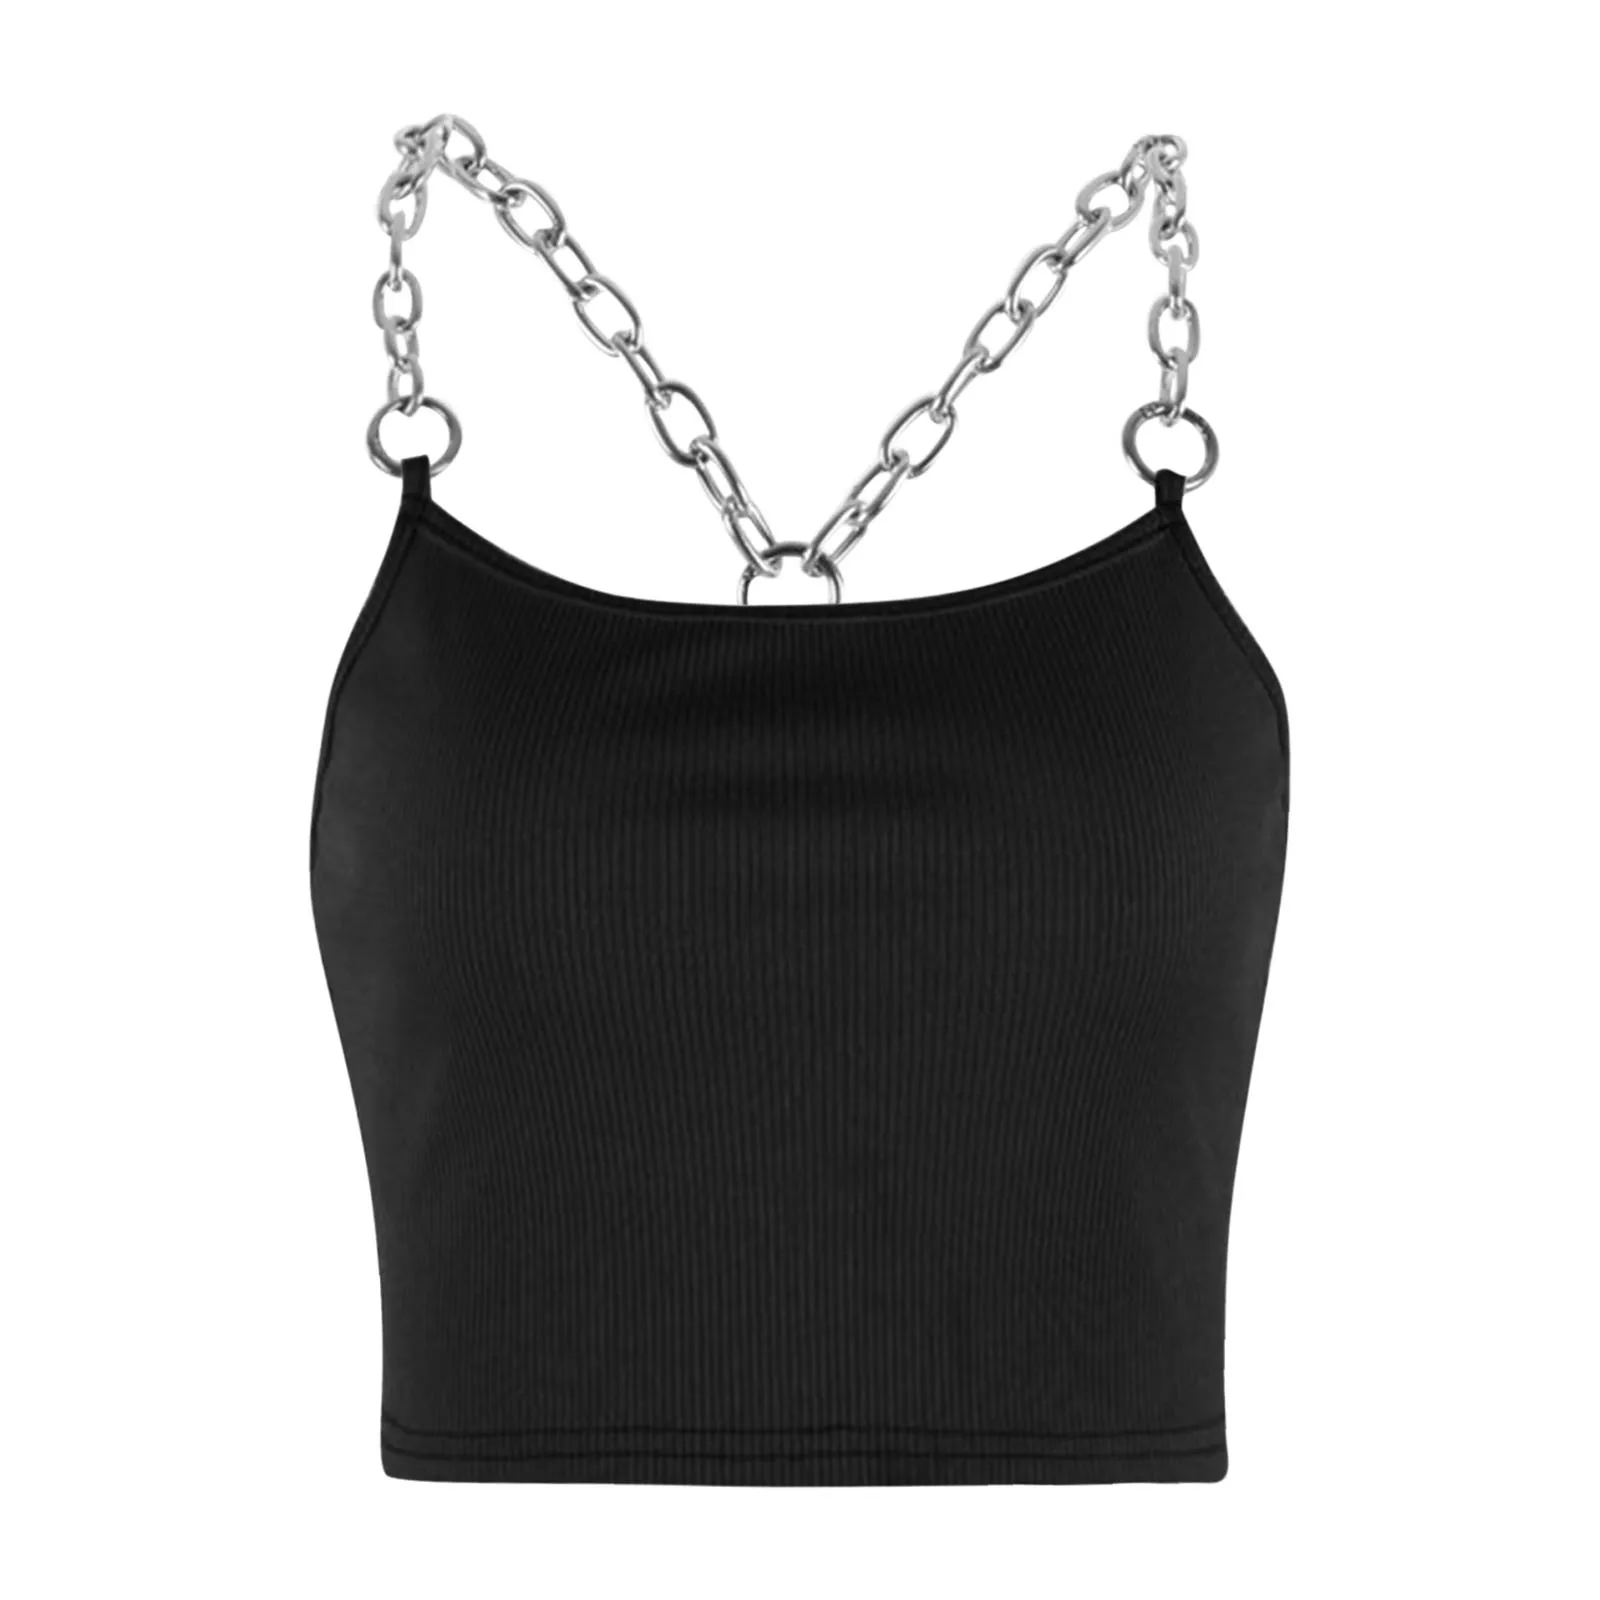 halter tops summer Women Sleeveless Strappy Tank O Neck Double Layer girl Casual Crop Tops Polyester Casual Cashmere spanx camisole